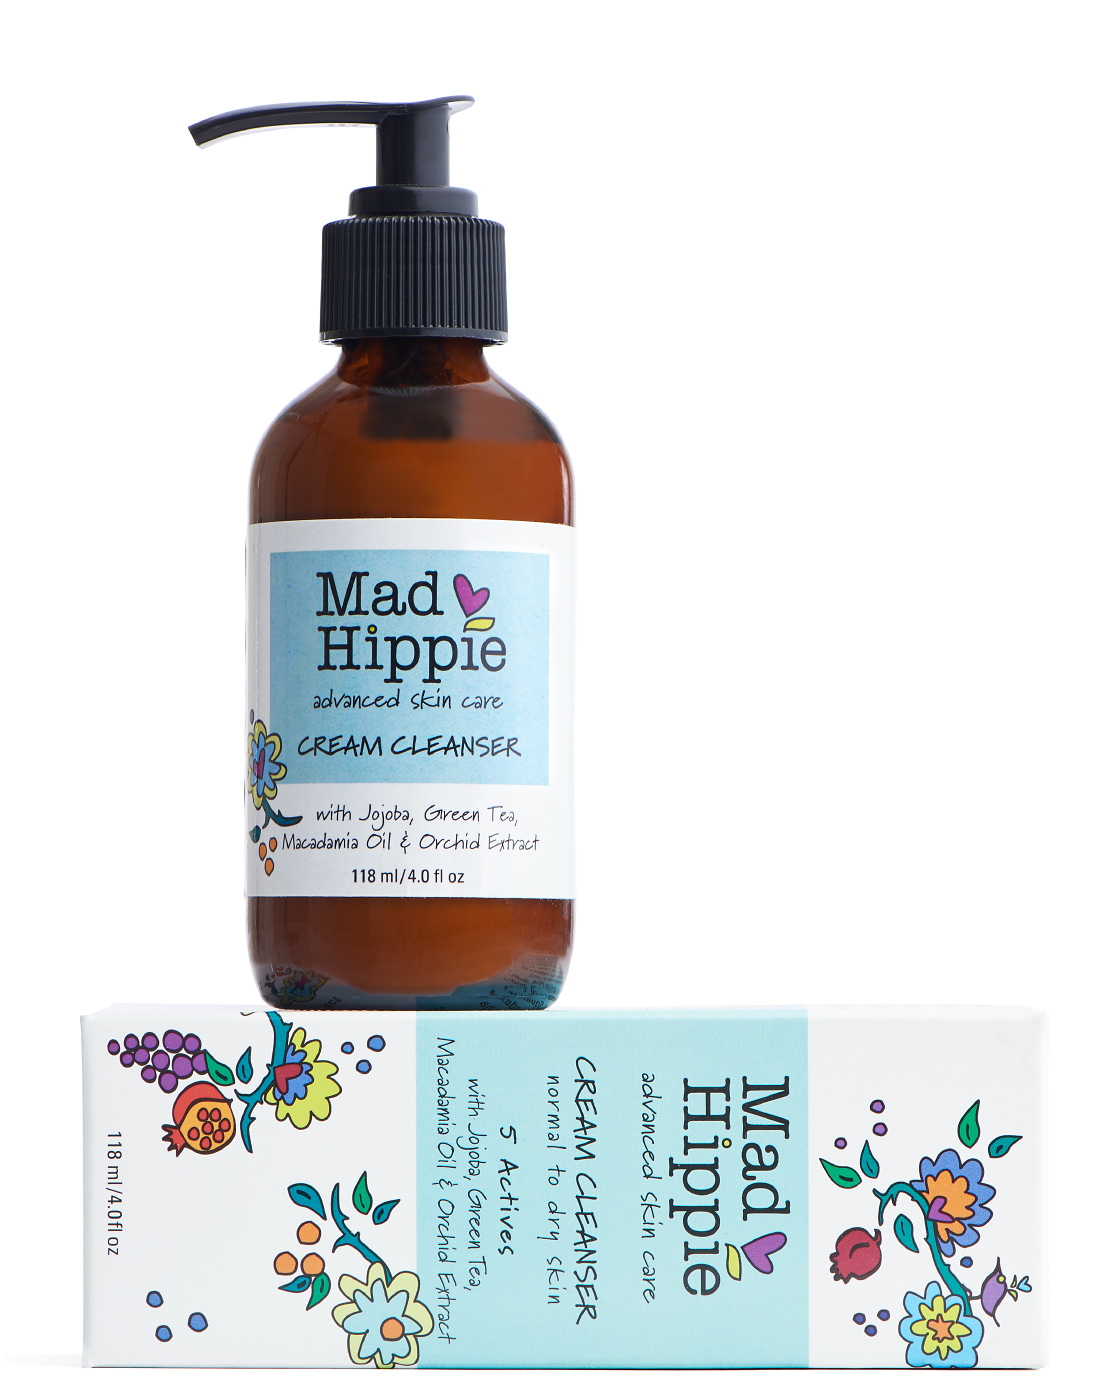 Mad Hippie - Main Product Images - Cream Cleanser.jpg